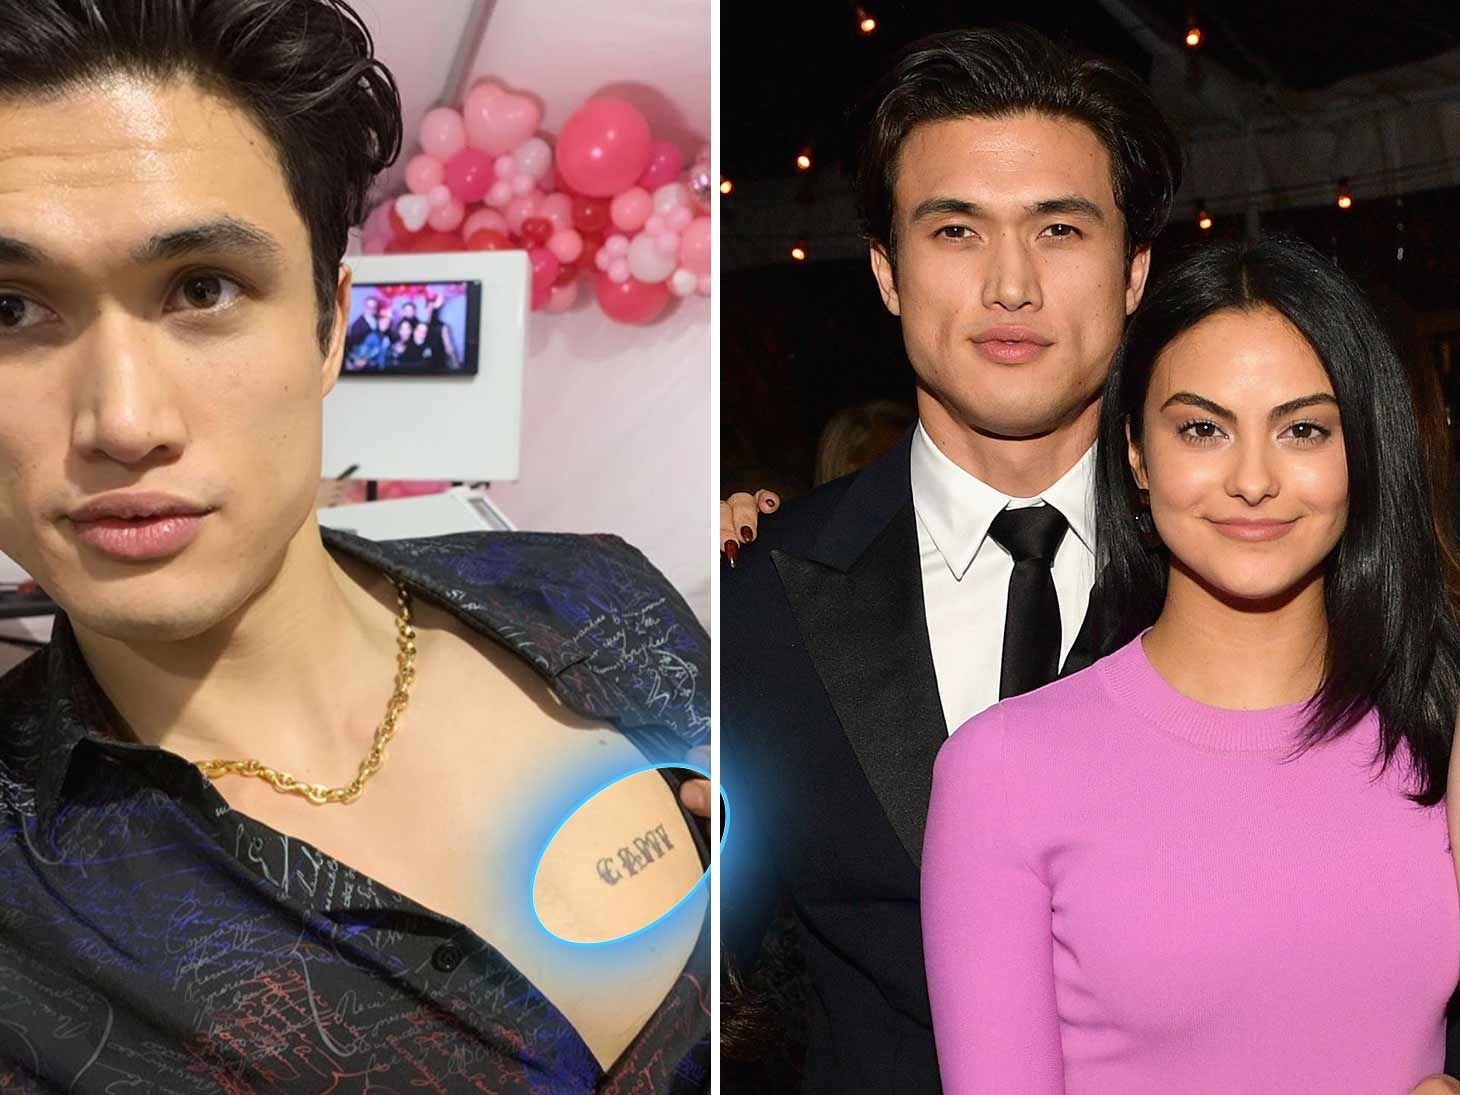 Riverdale Star Charles Melton Got His Girlfriend Camila Mendes Name Tattooed On His Chest